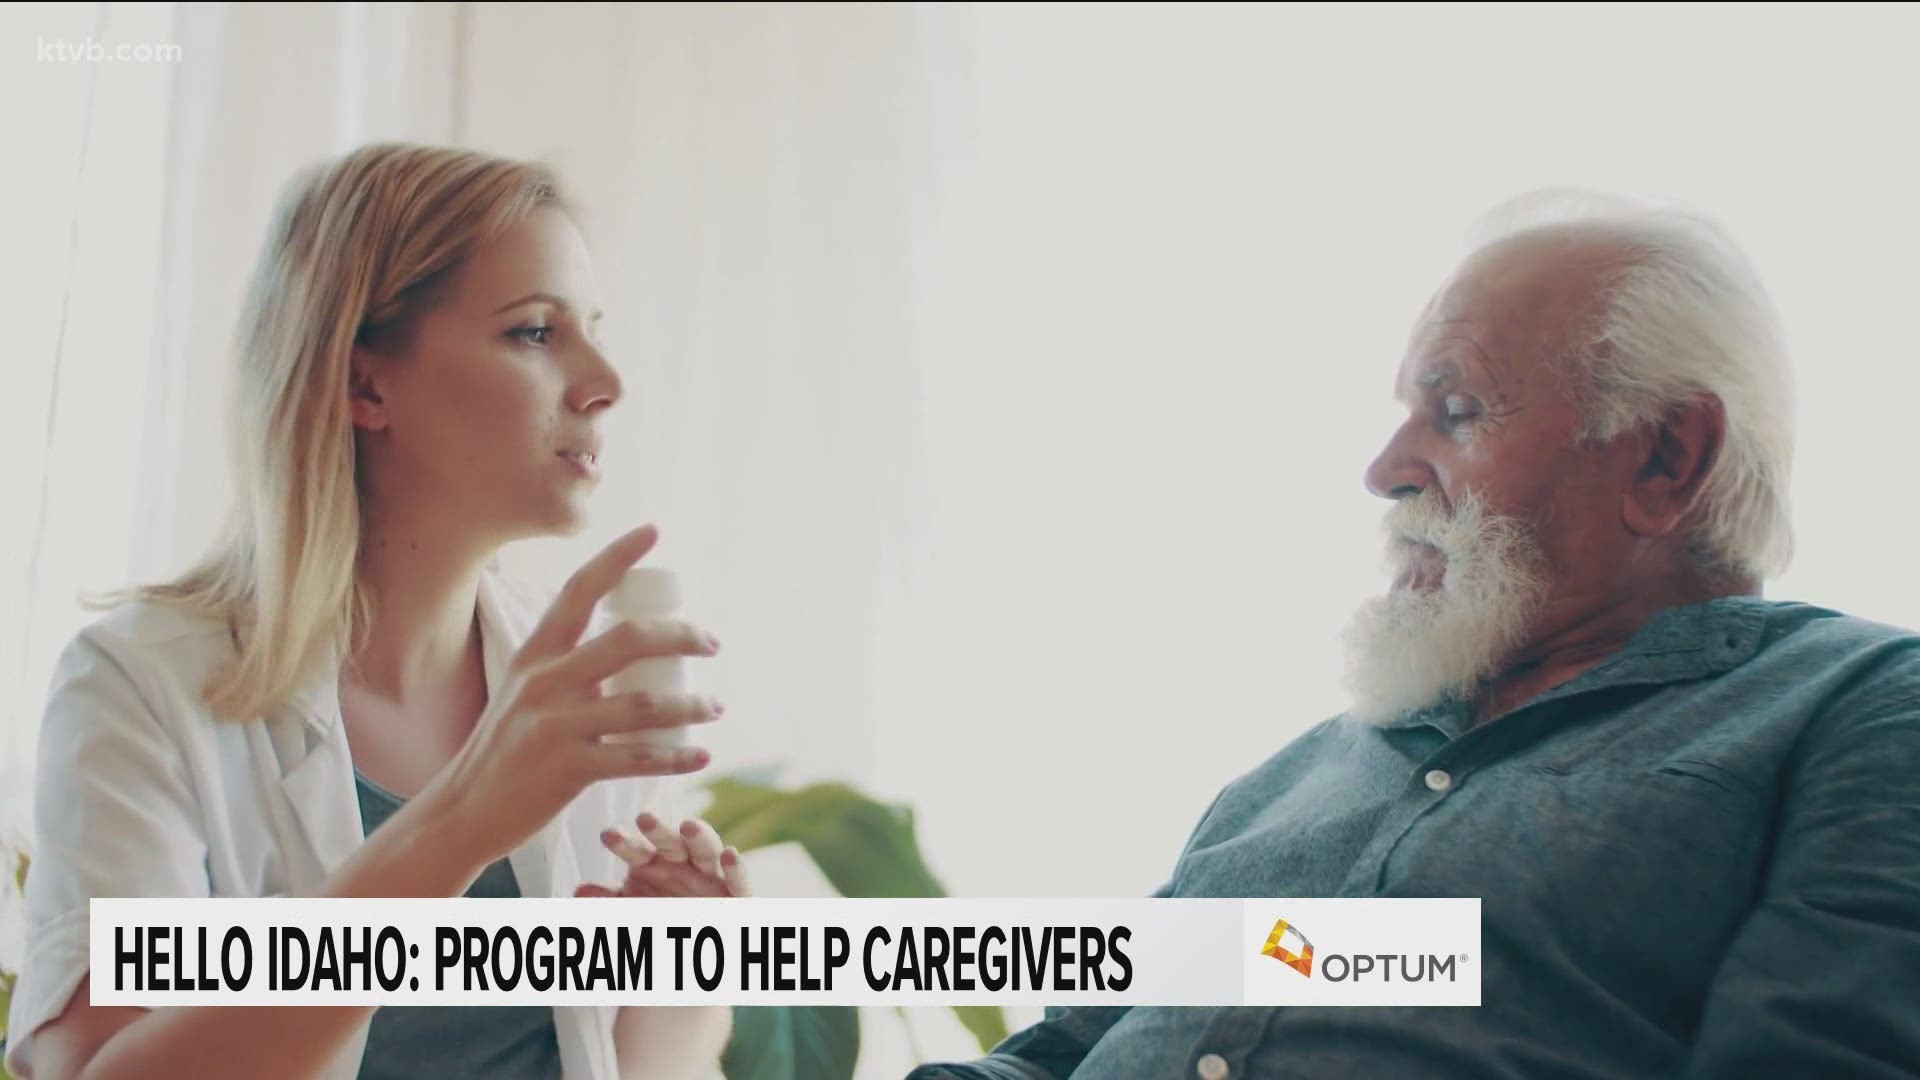 The new program aims to help the estimated 300,000 people in Idaho who provide in-home care for loved ones take care of themselves, too.